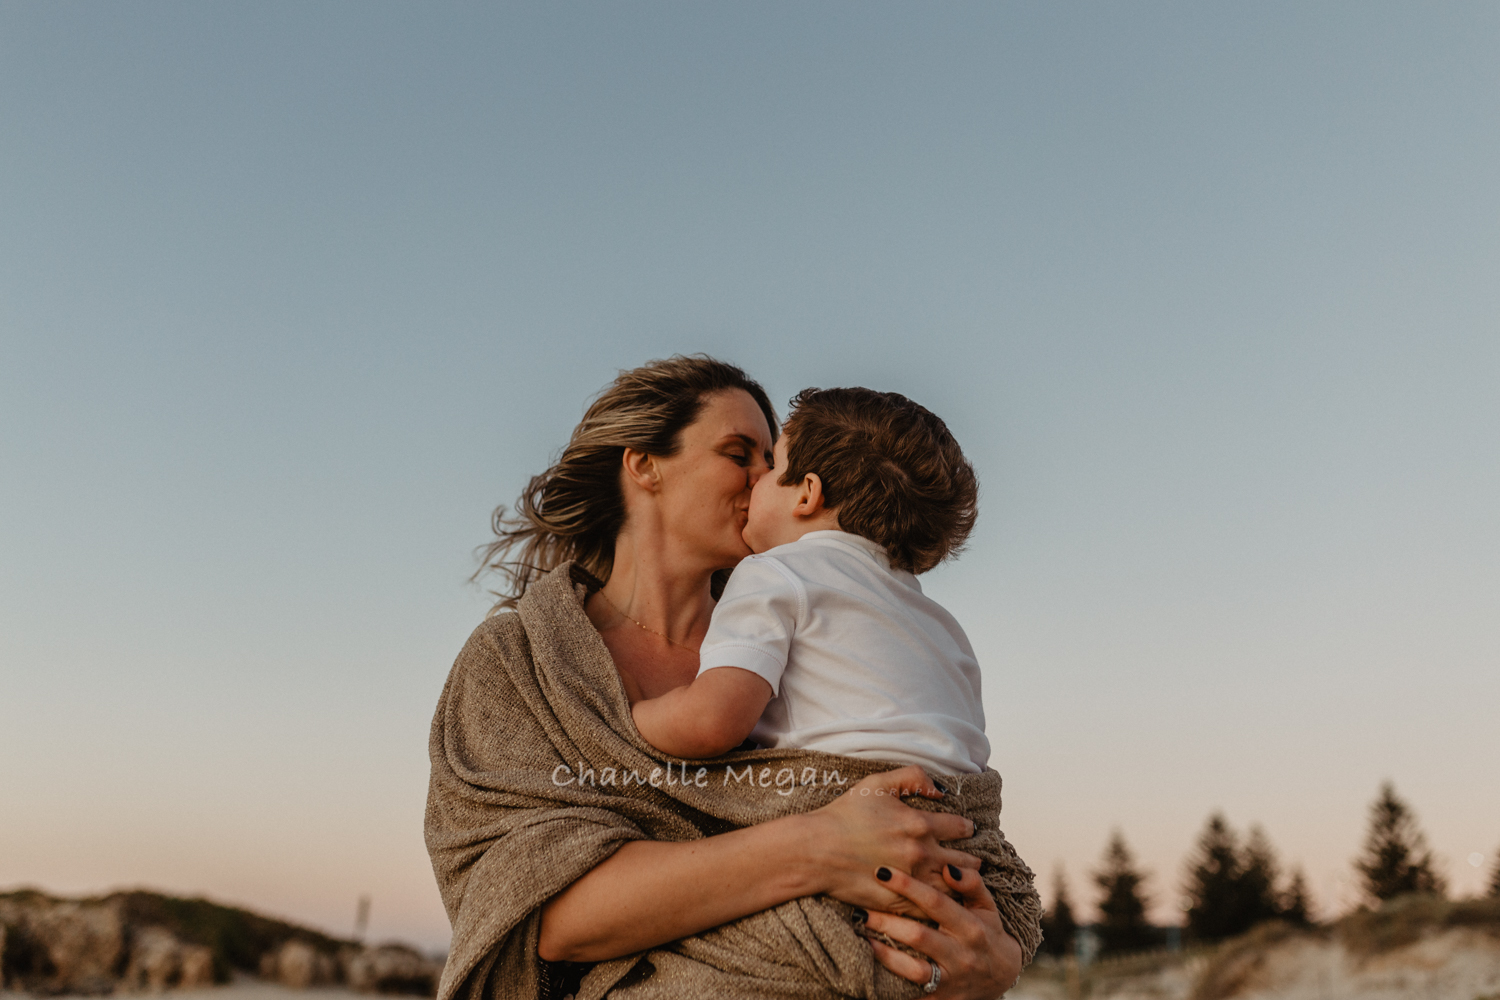 Perth Family, Newborn and Mummy and Me Photographer, Chanelle Megan Photography capturing candid and authentic moments